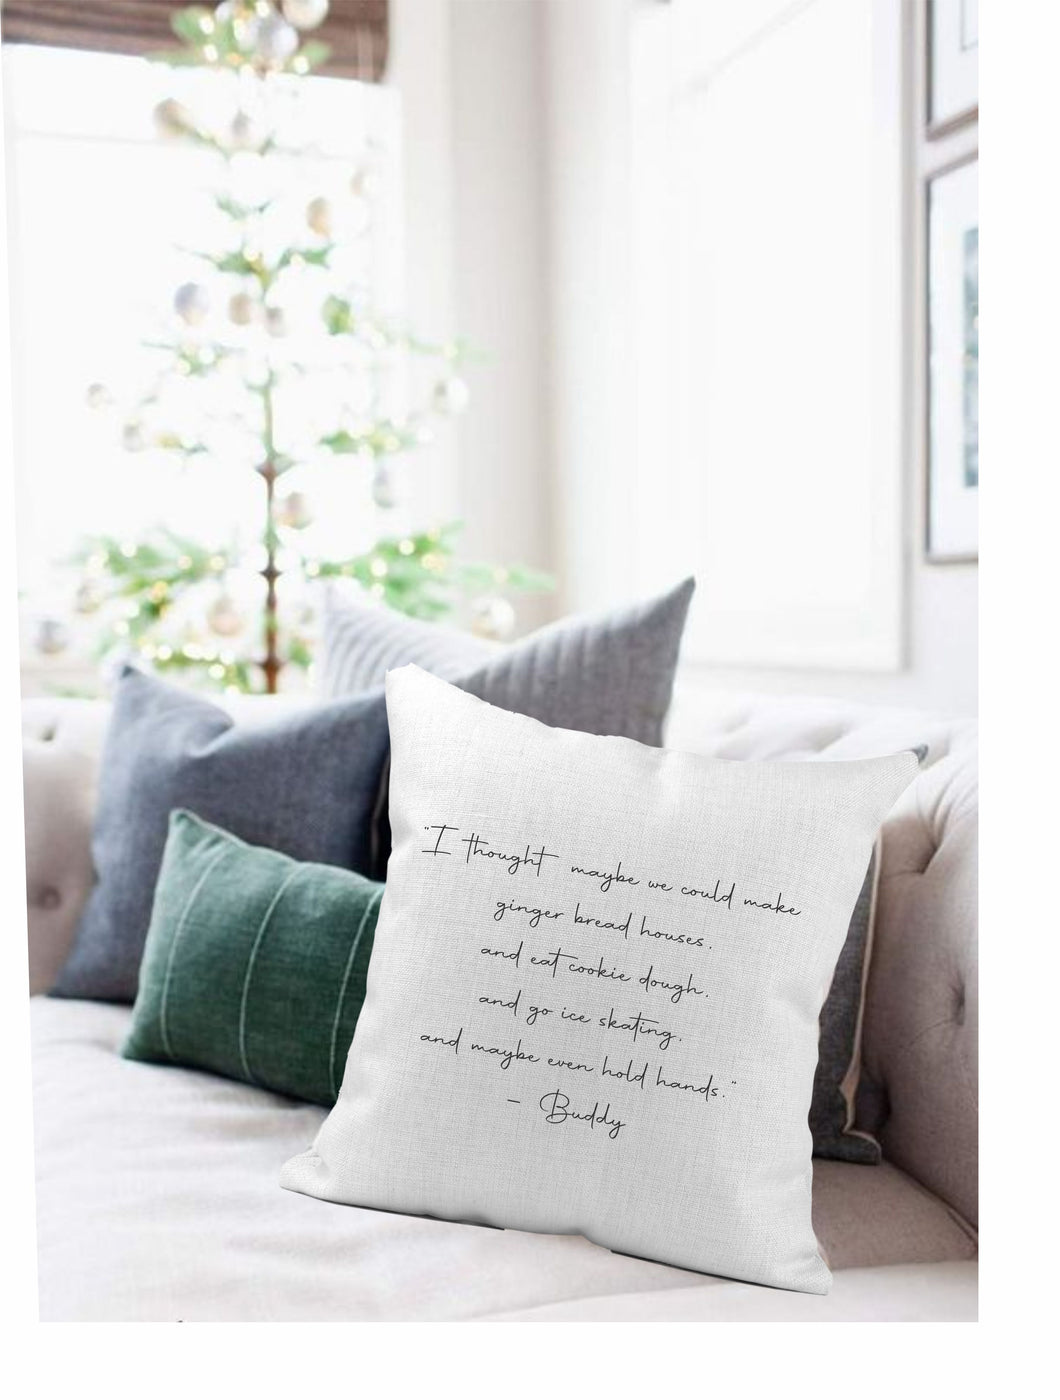 Buddy - I thought maybe we could... Quote Pillow Cover